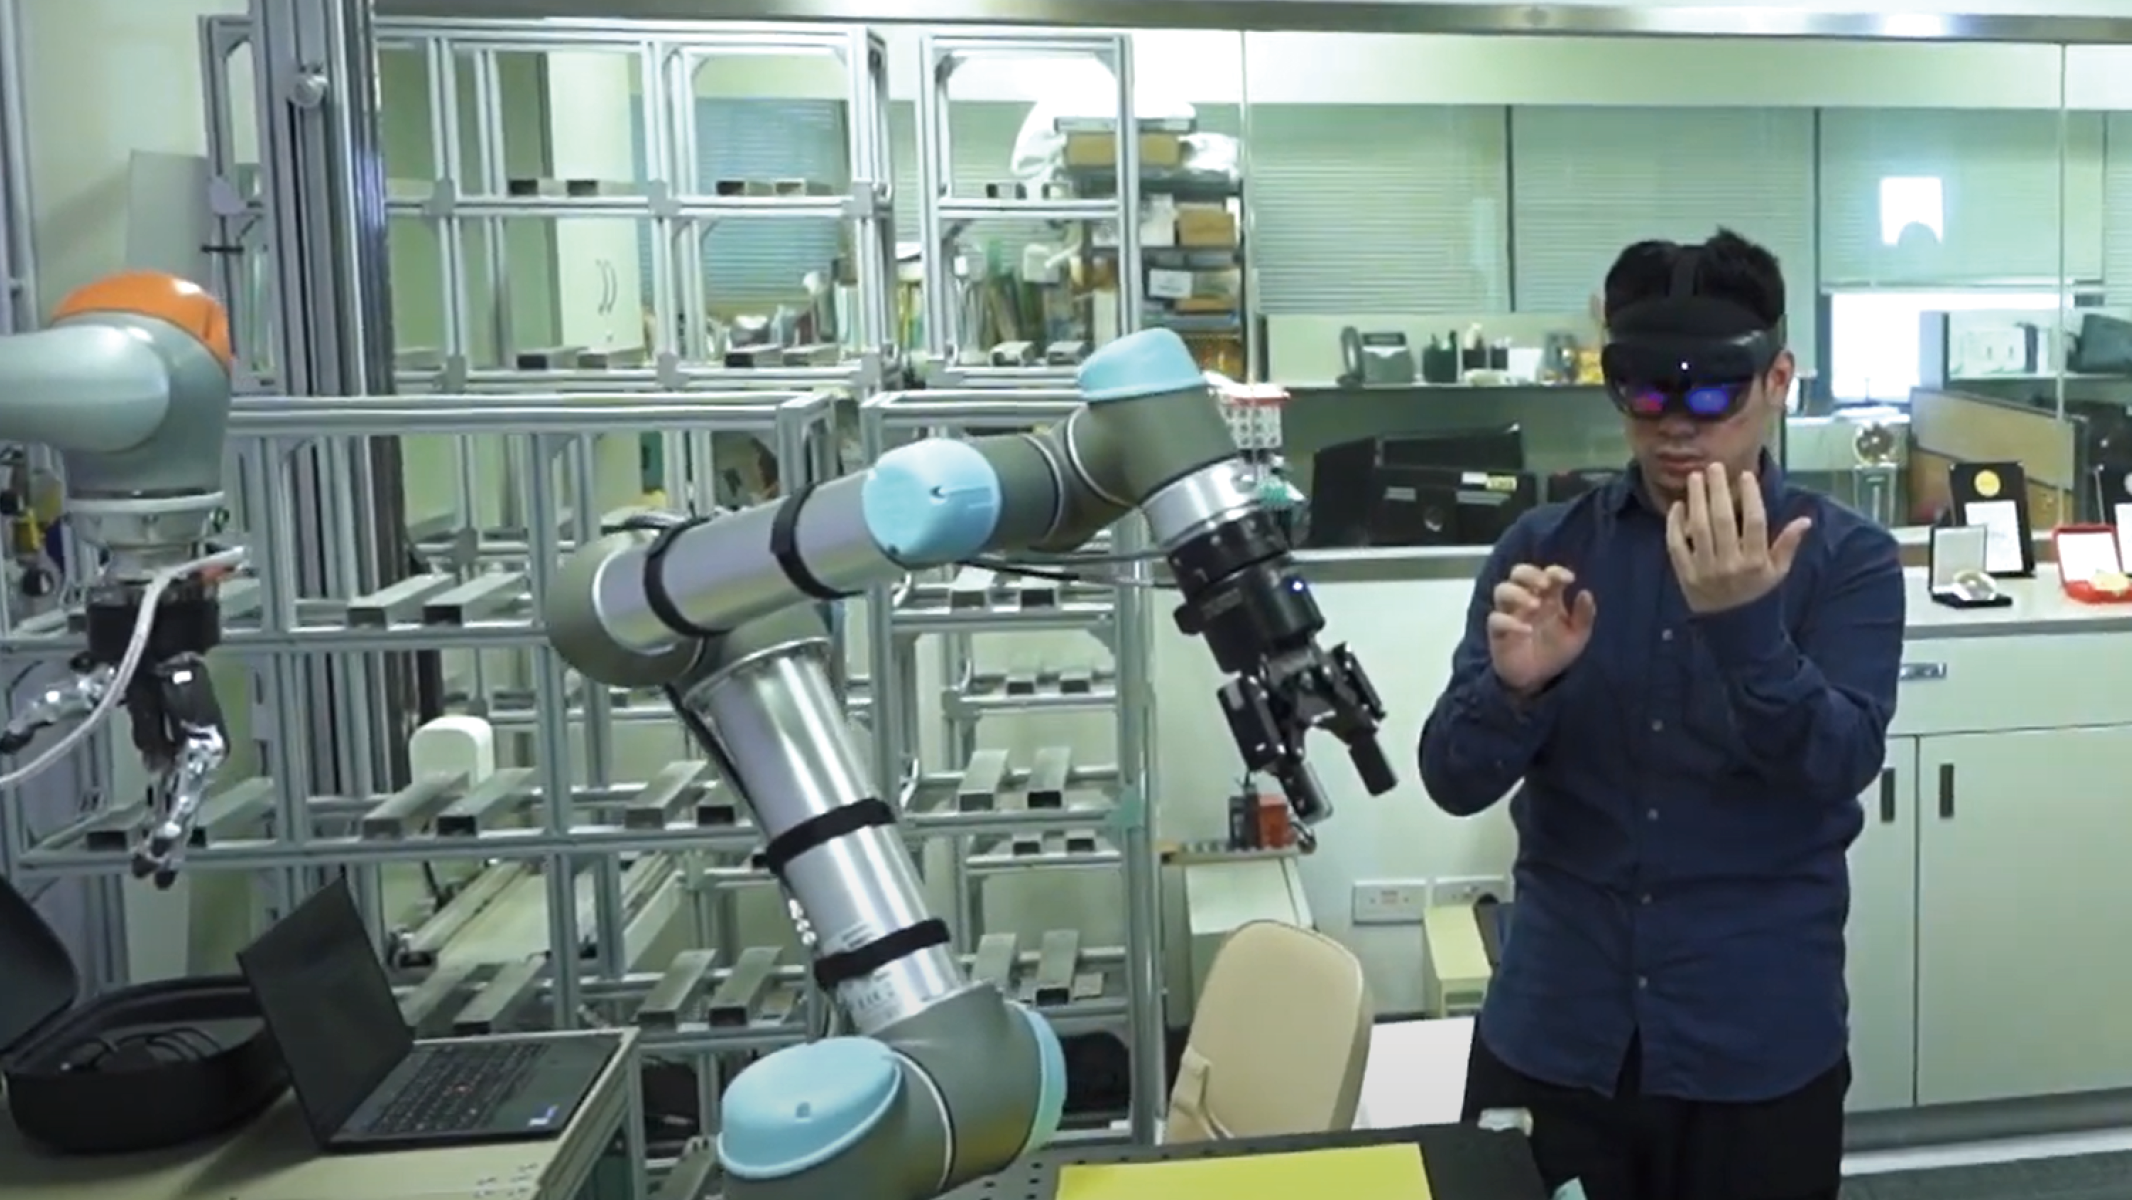 The project emulates the interaction between human operators and robots in an AR environment.